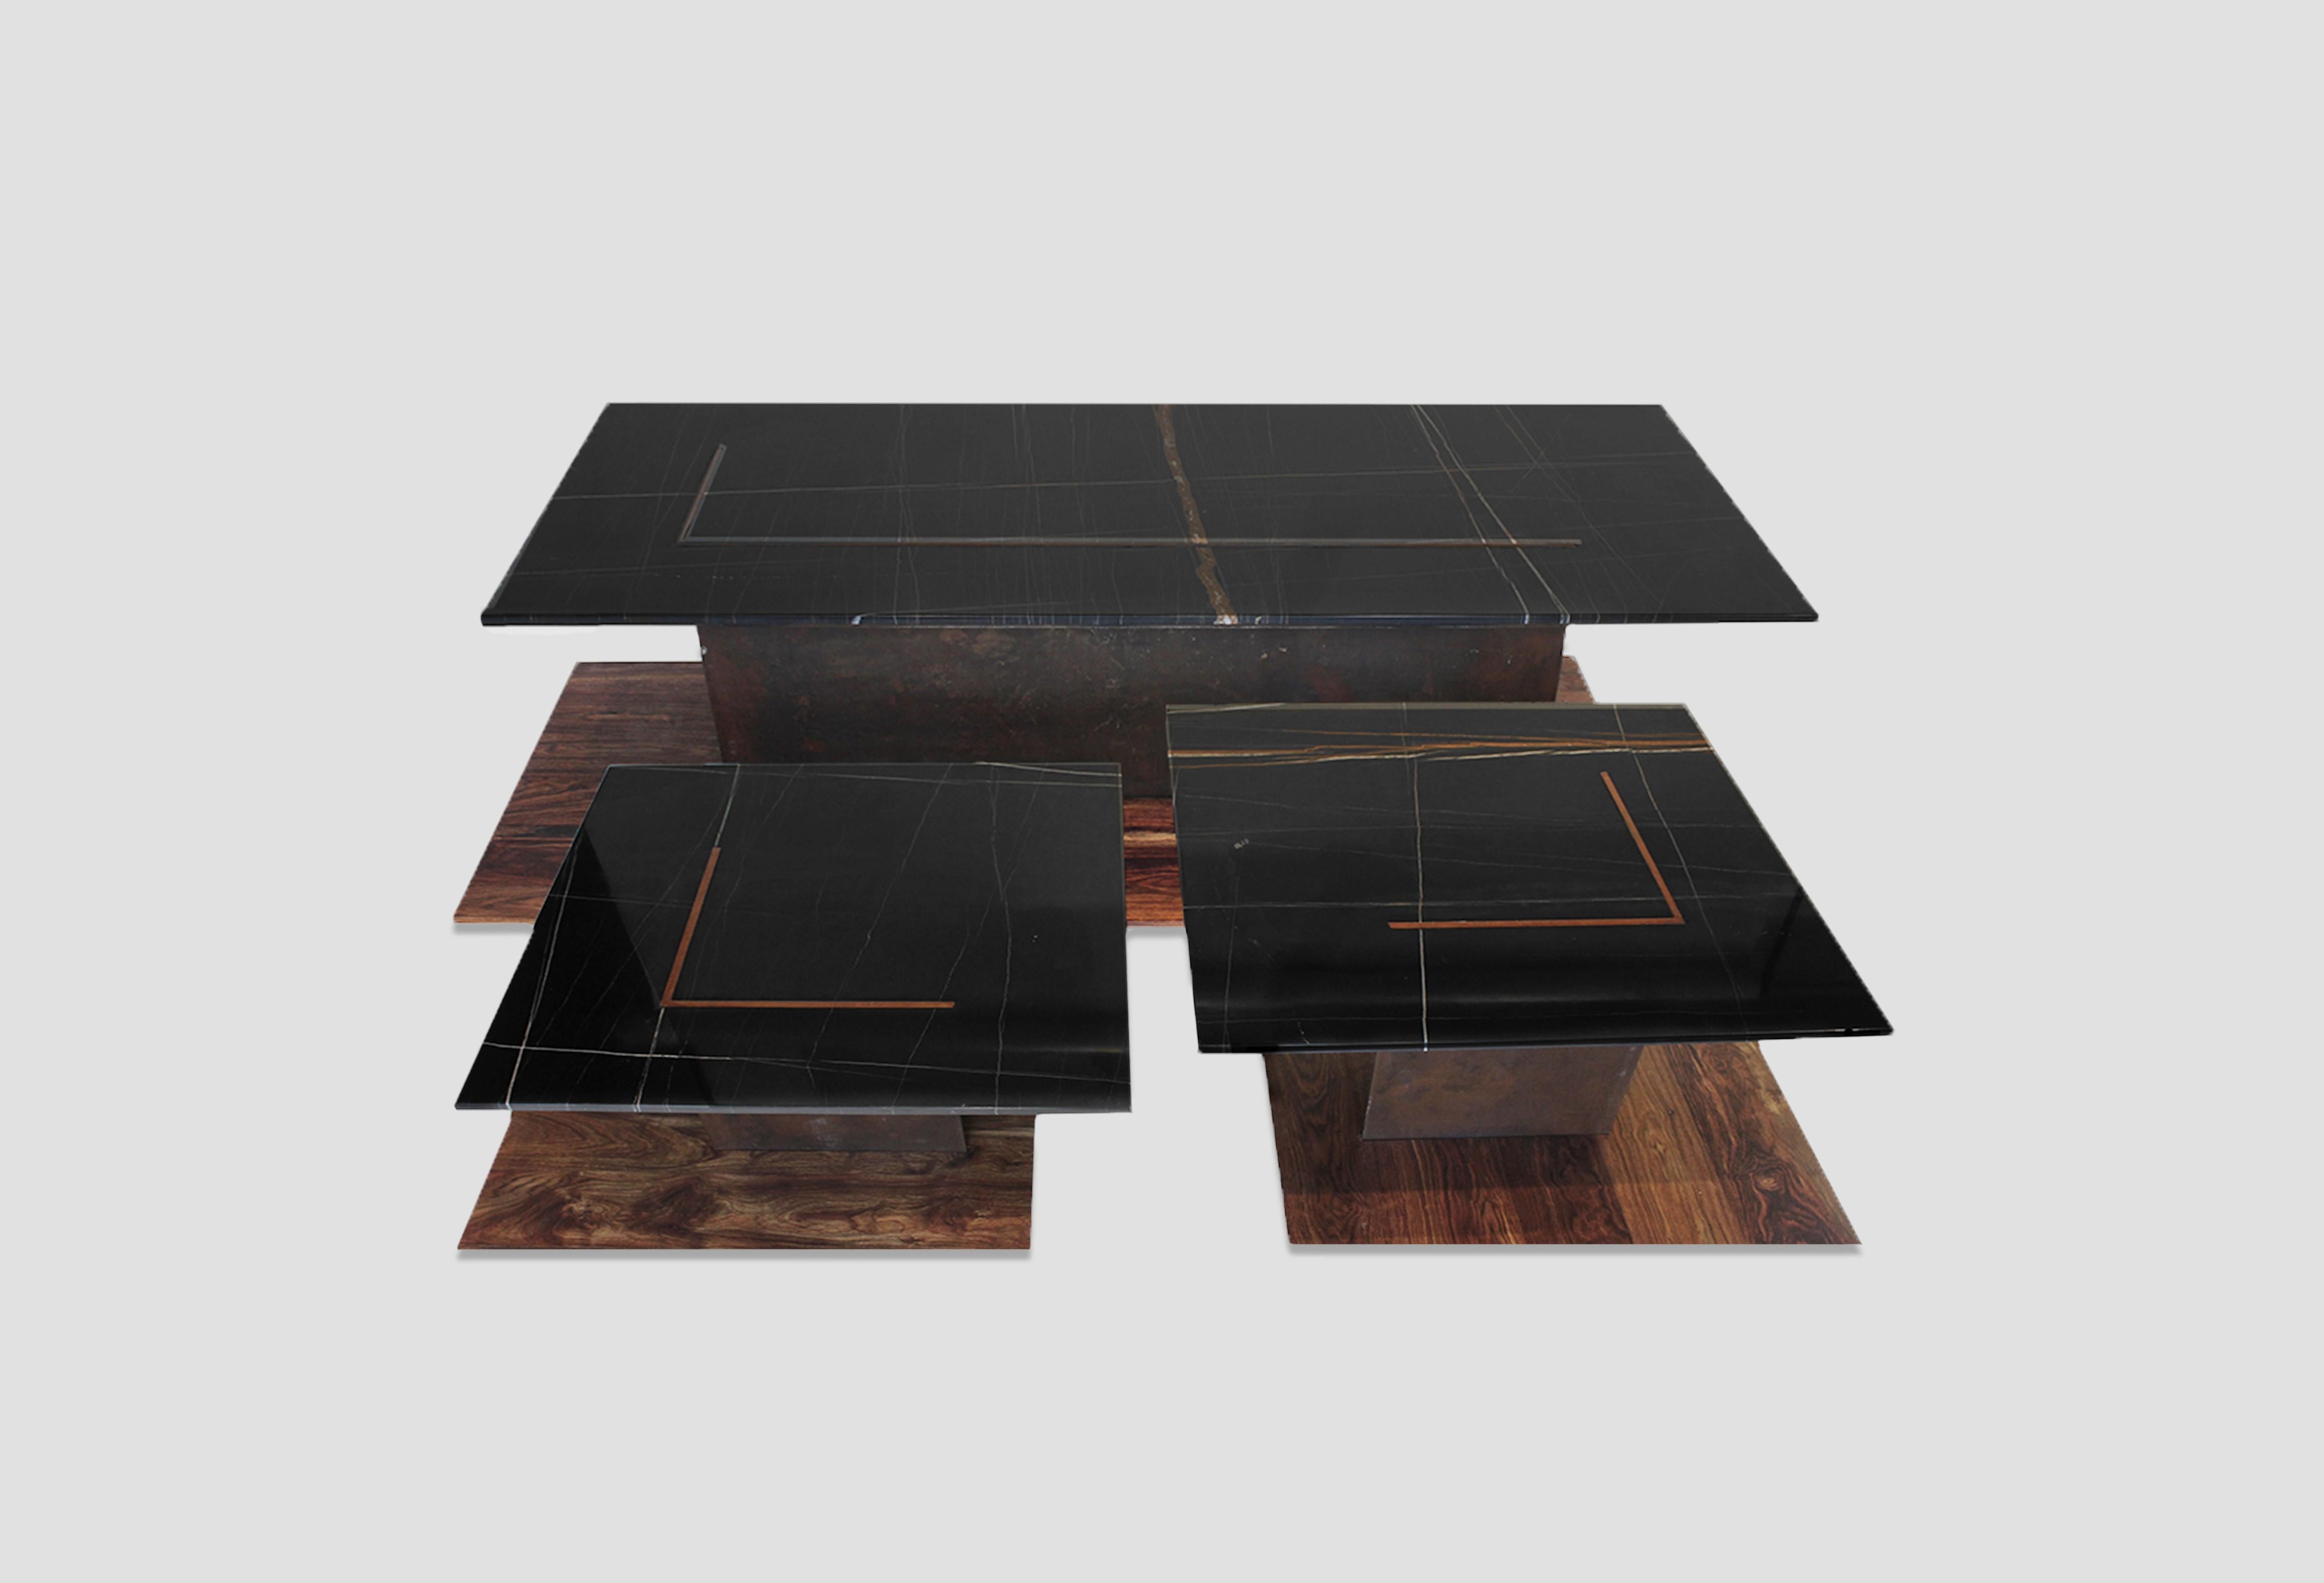 Set of 3 Tres tables by Andrea Cesarman
Dimensions: D 152 x W 152 x H 40 cm
Materials: Chechen wood, oxidized steel, Black Sahara marble

Coffee tables made in Chechen, oxidized steel and Black Sahara marble.

Andrea Cesarman is an interior